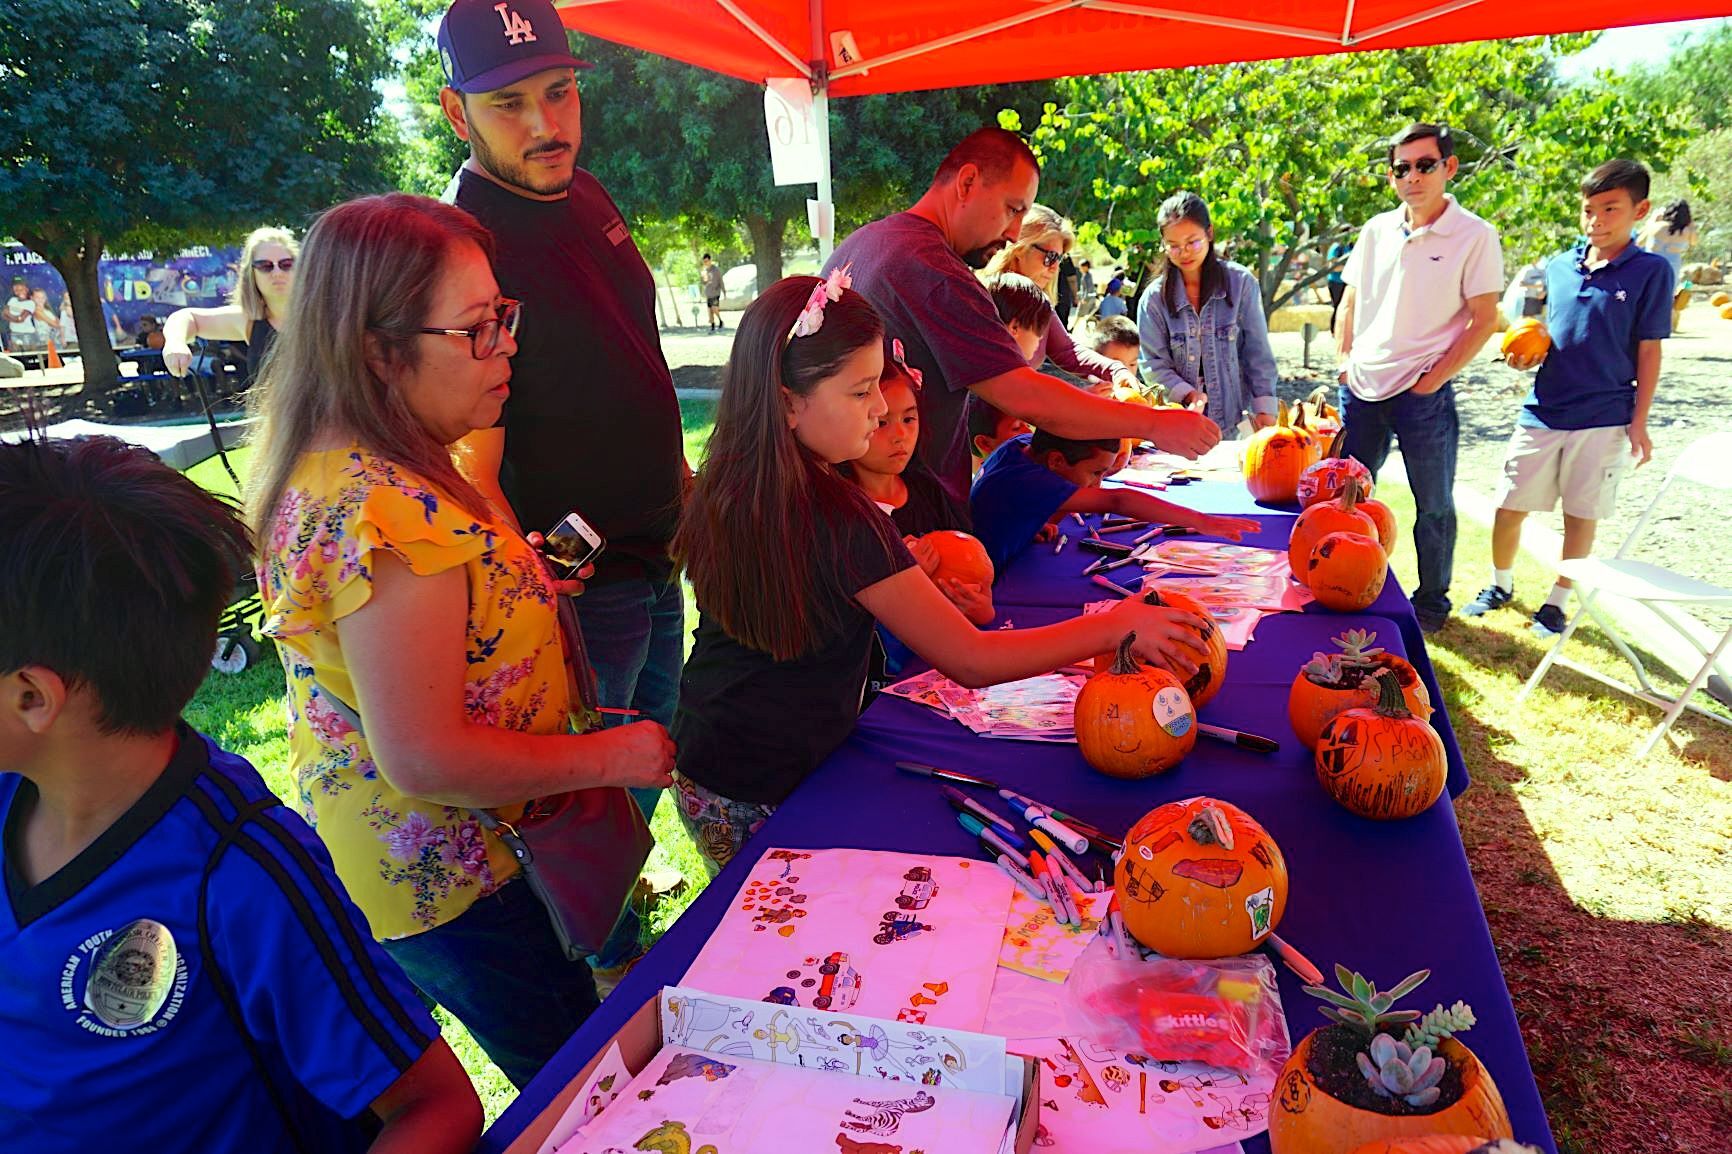 Pumpkin decorating is a popular family attraction at the water conservation festival.